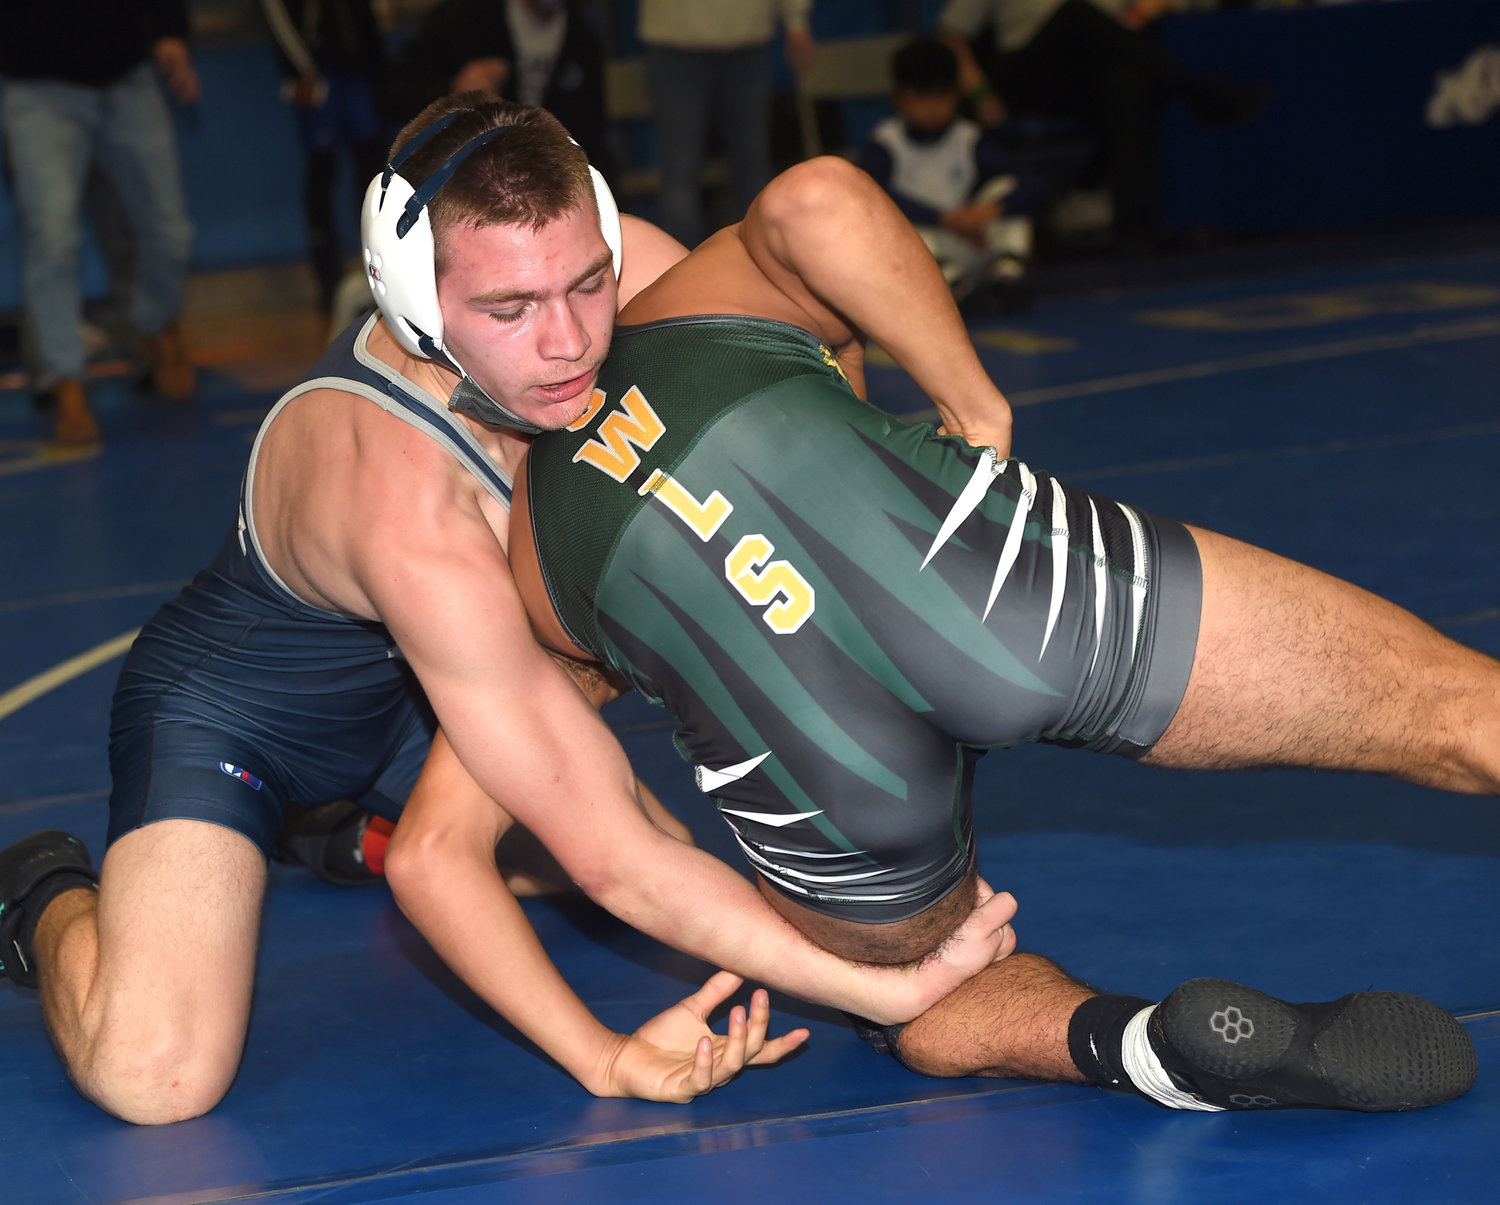 Oceanside's Hugh Bittenbender, left, had a solid showing in the Long Beach Tournament at 138 pounds to open the campaign.